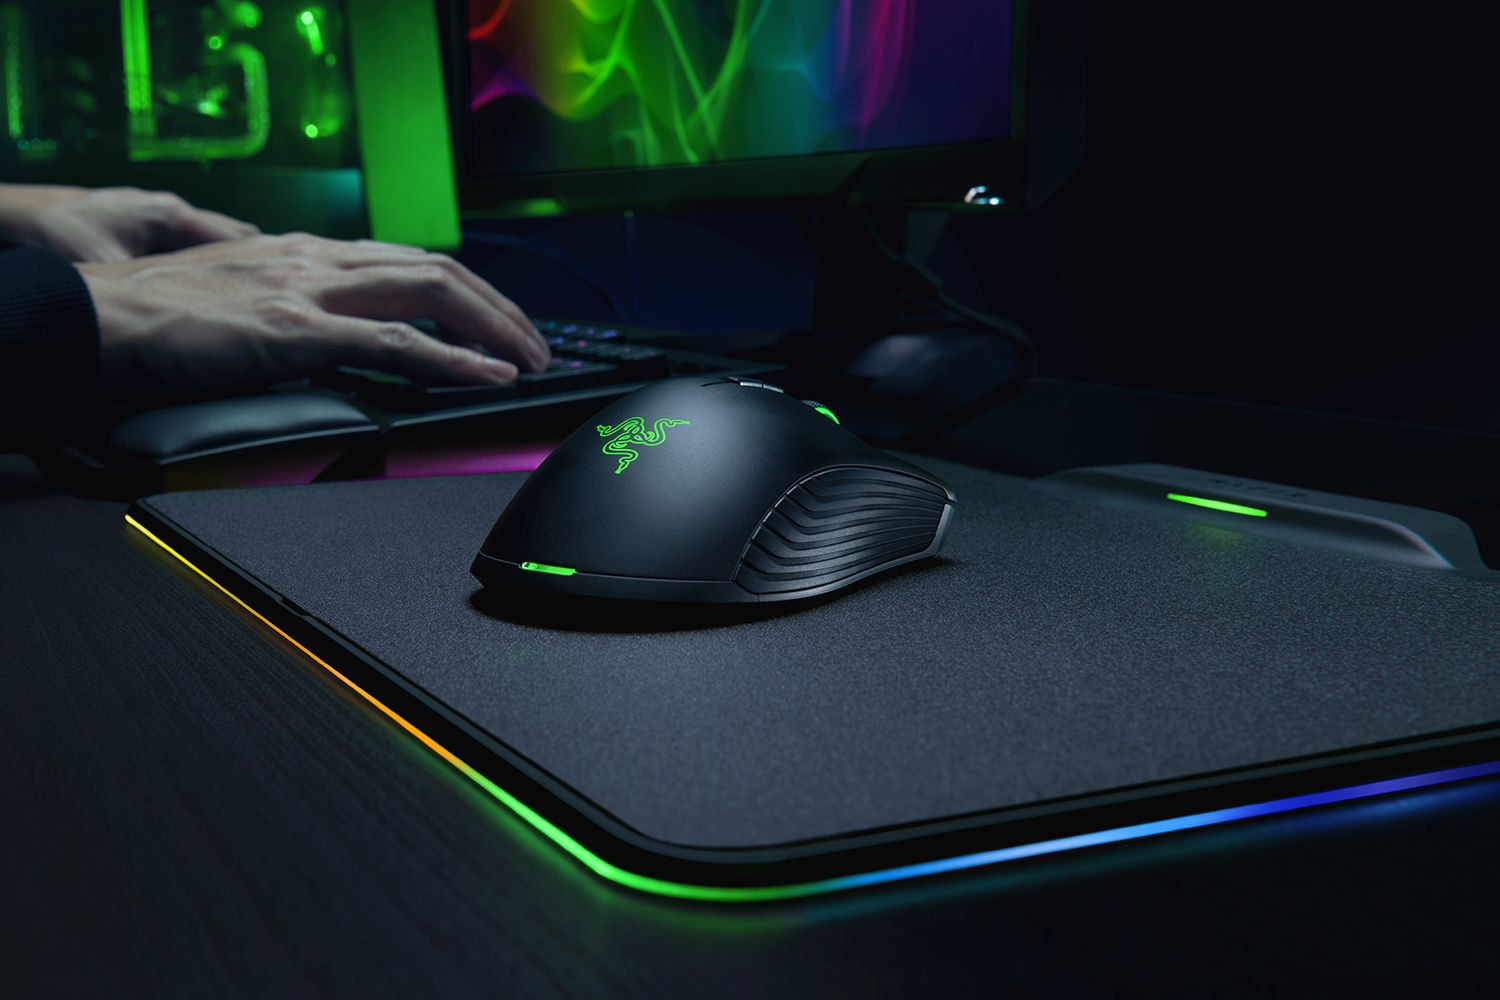 Get this featherlight Razer Viper gaming mouse and charging dock